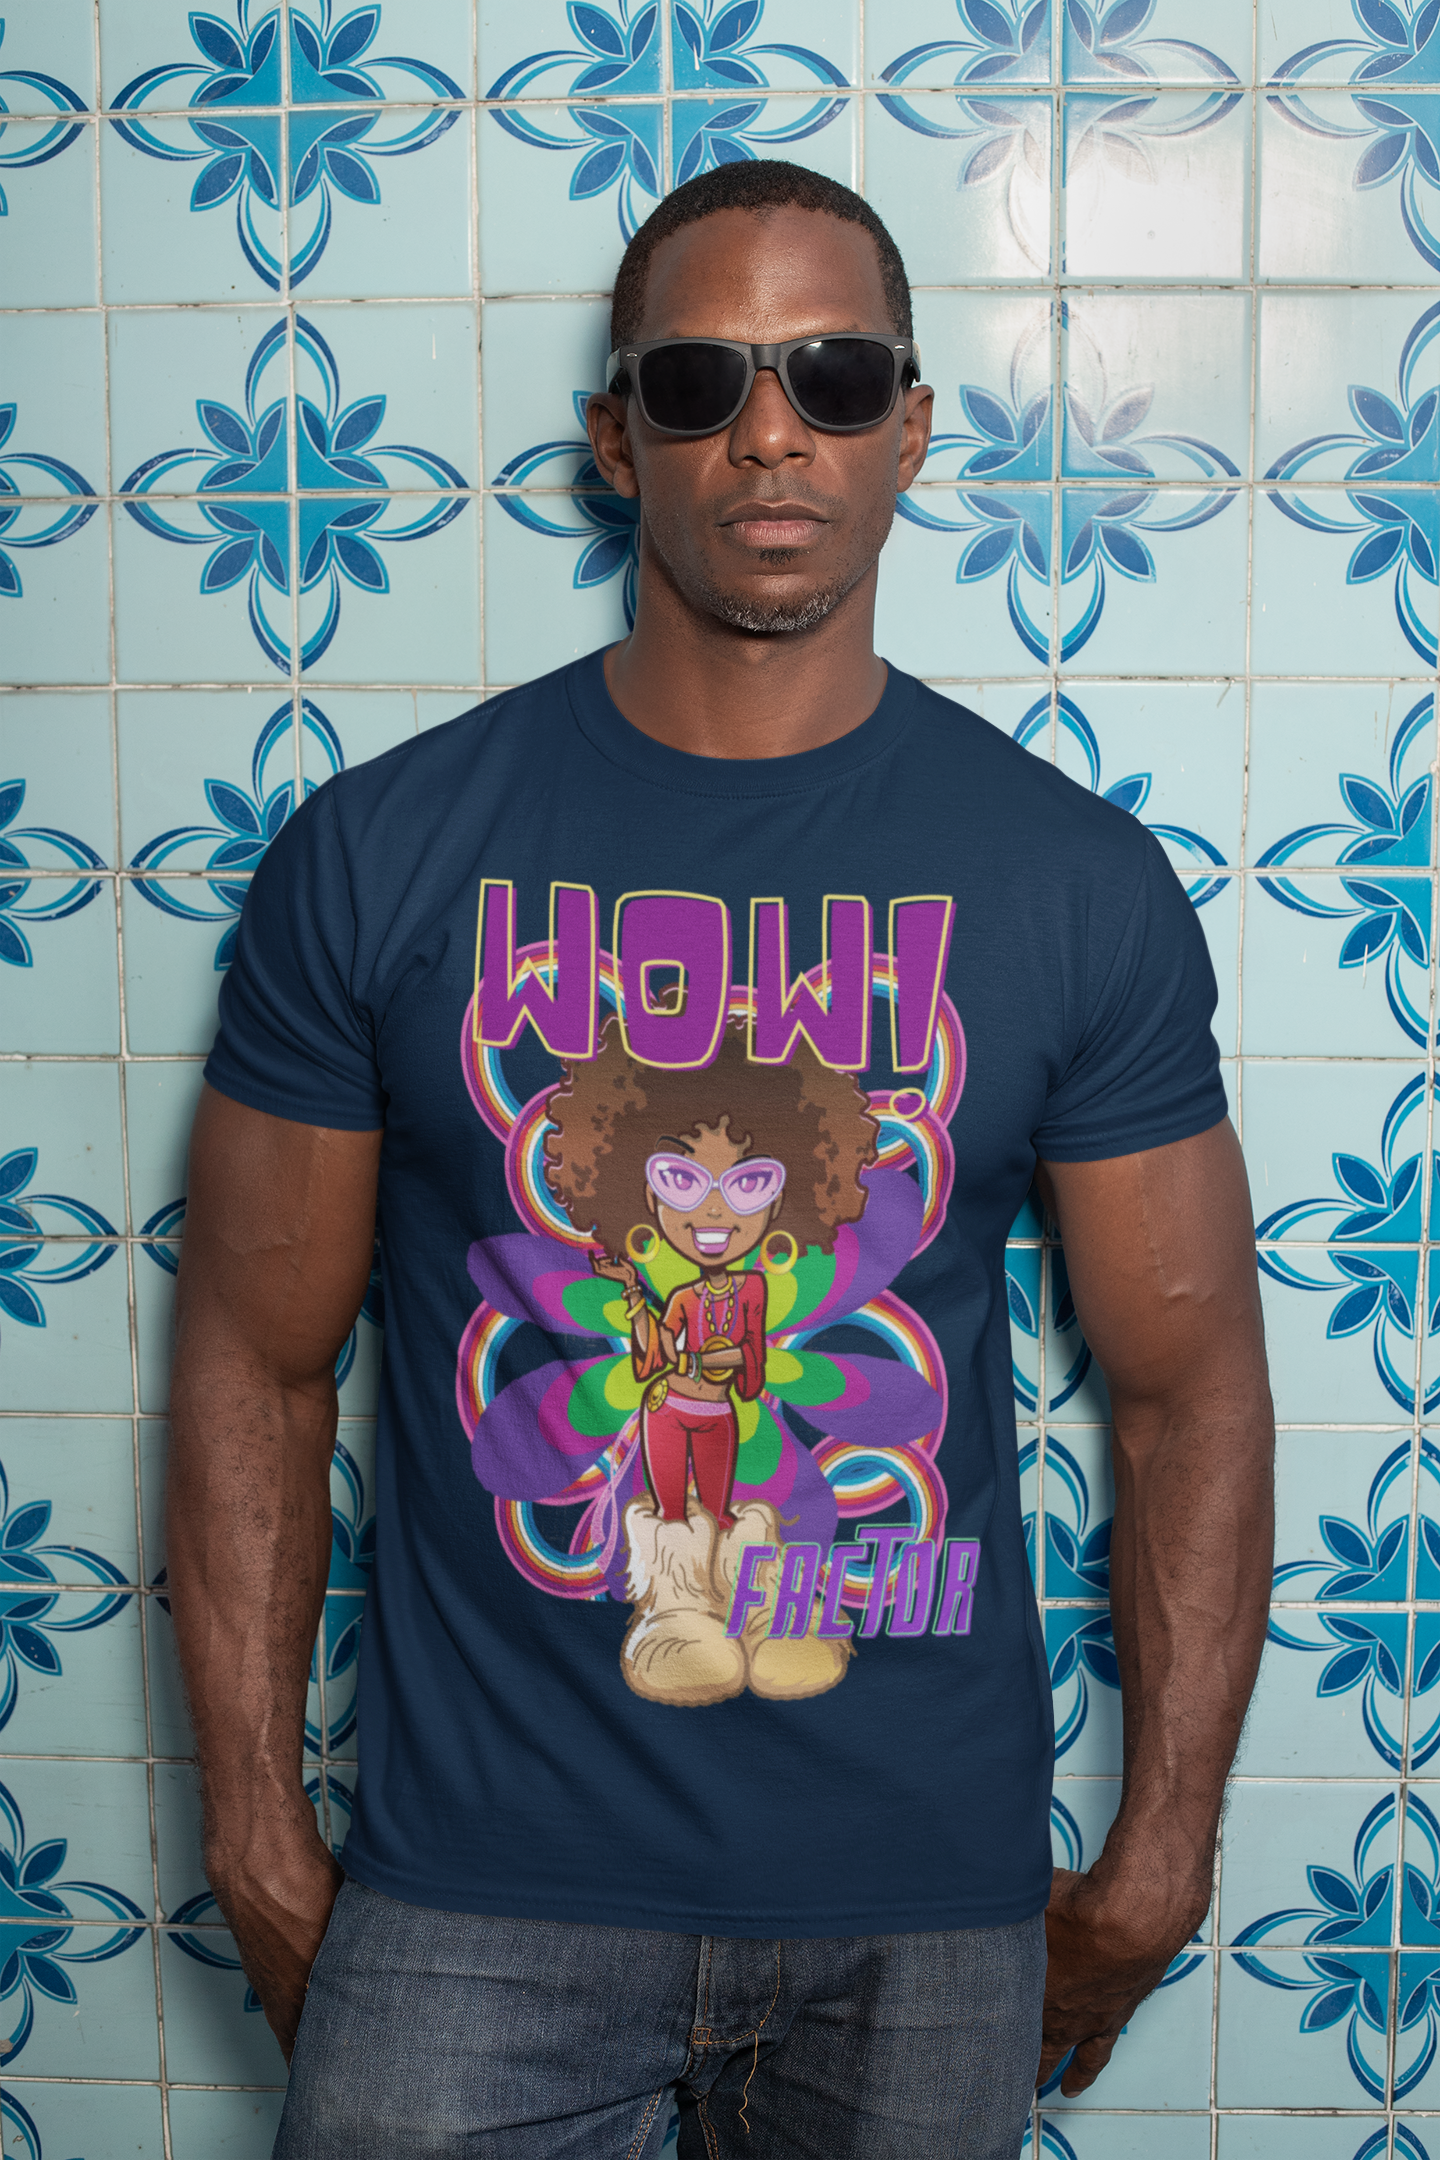 Wow Factor Groovy Black Girl in Boots Short-Sleeve Unisex Softstyle Tee